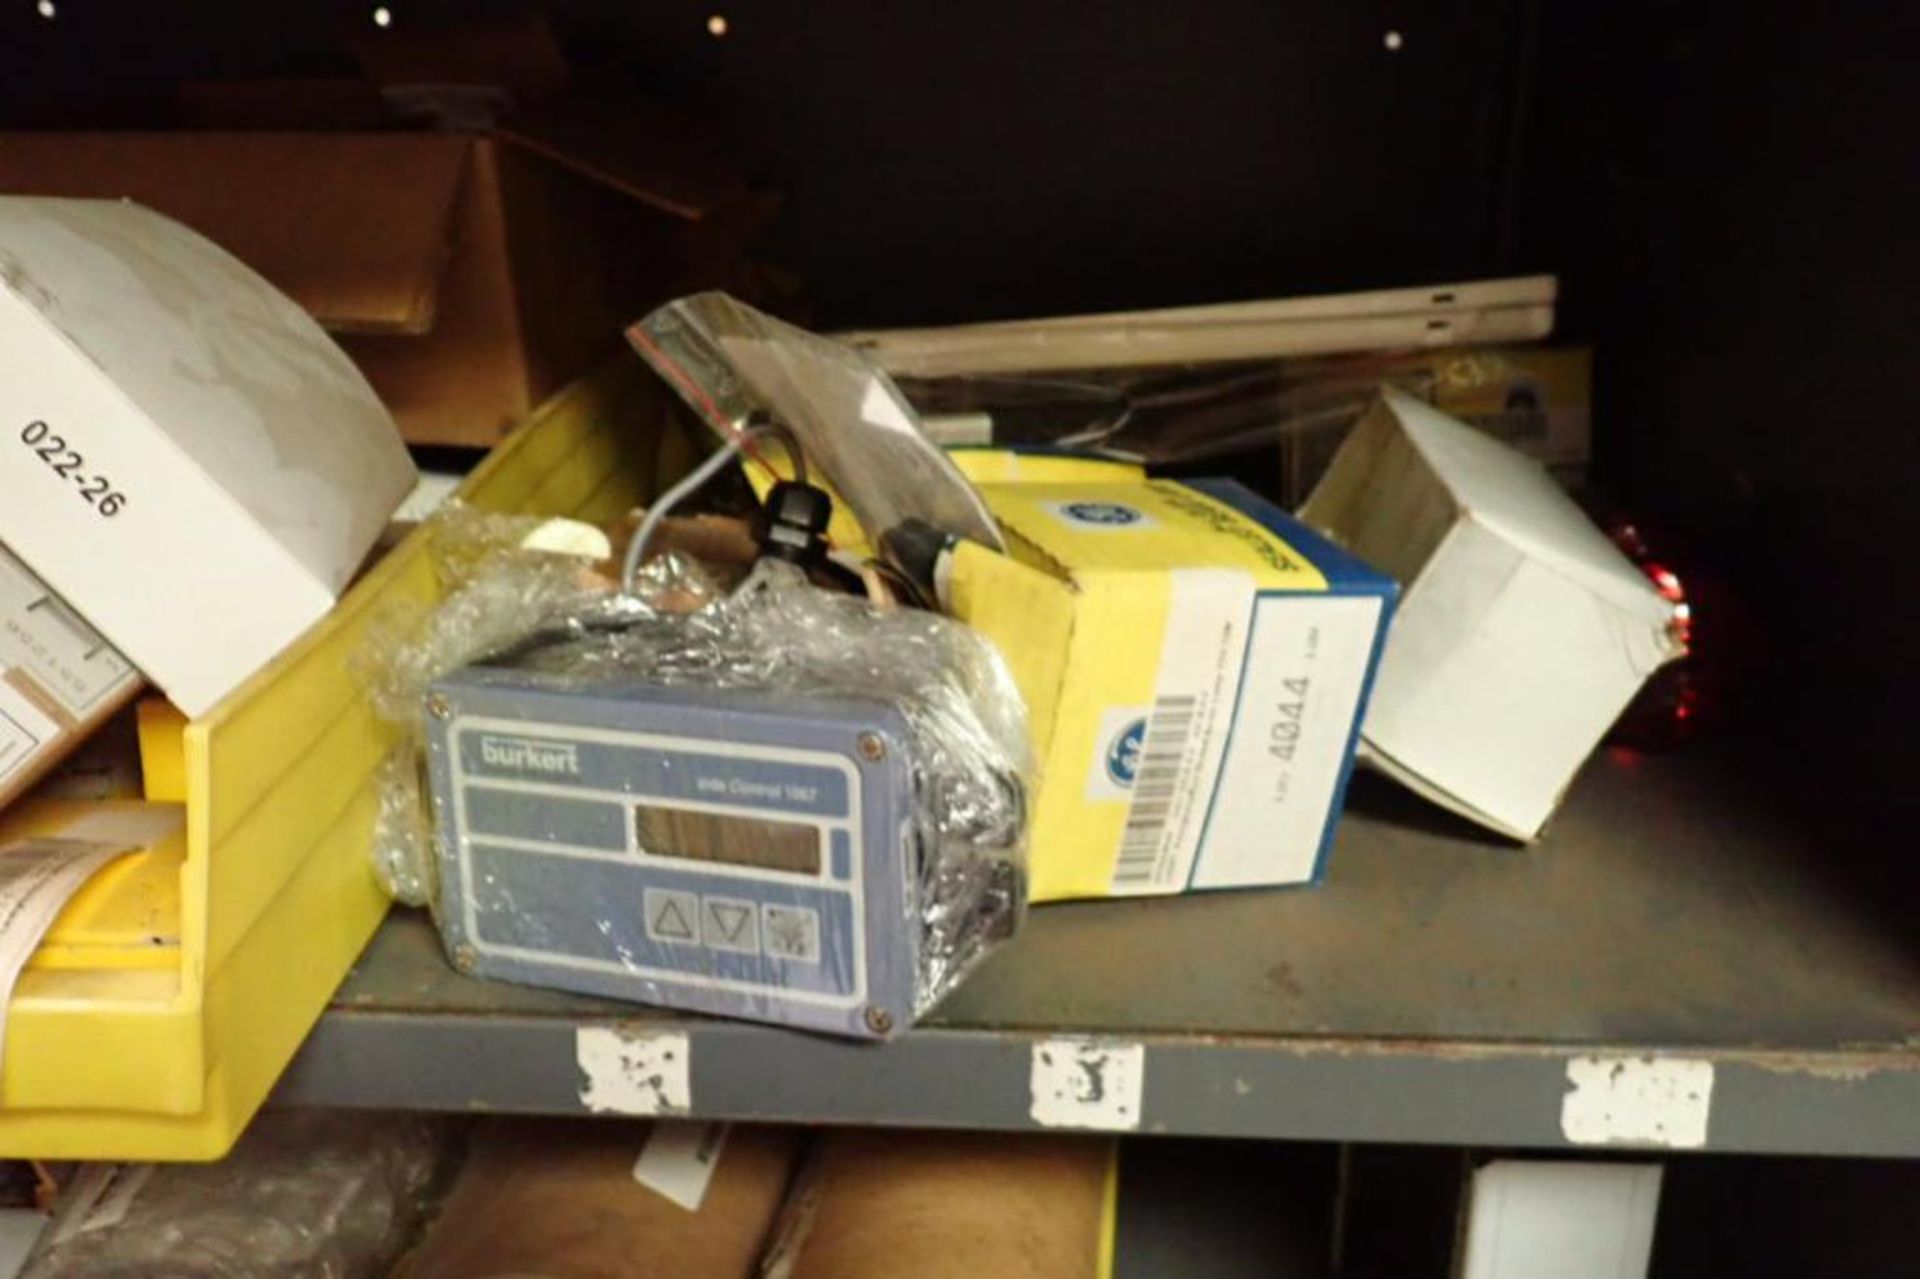 Contents only of 1 section of shelving, Allen Bradley vfds, power flex 4, 4m, 40, 525, Loma scale he - Image 37 of 43